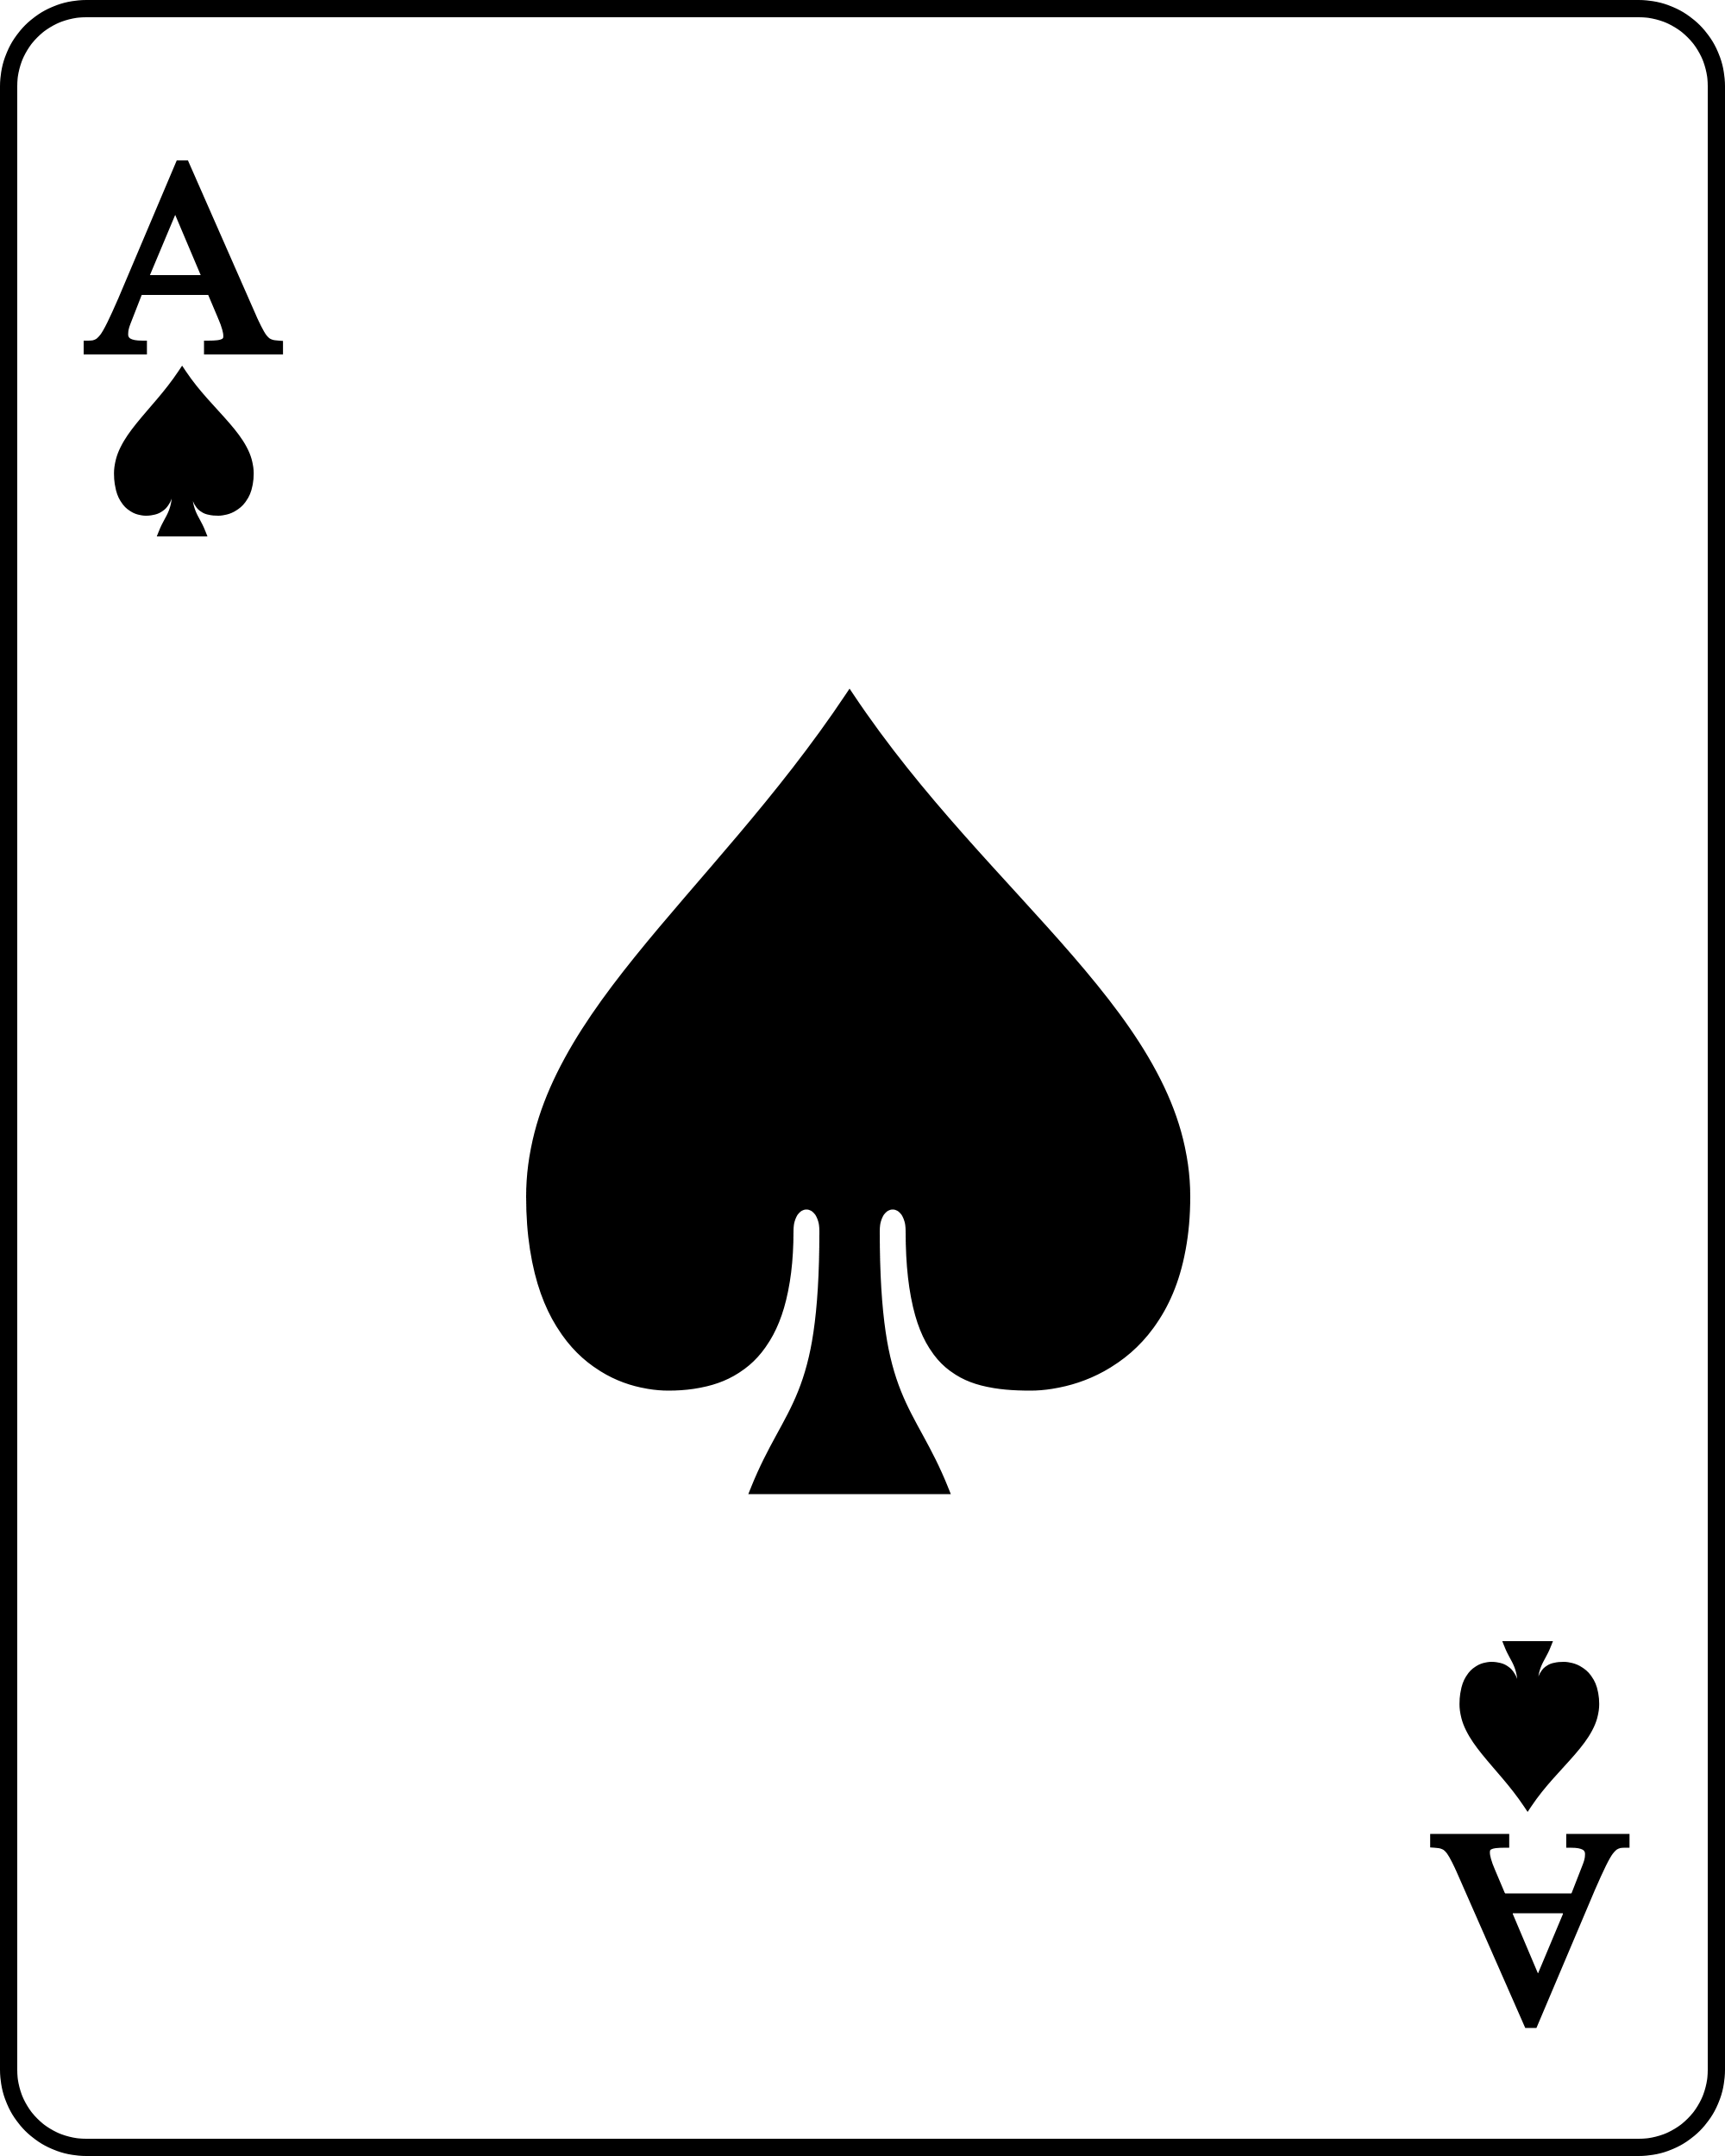 File:Playing card spade A - Wikimedia Commons